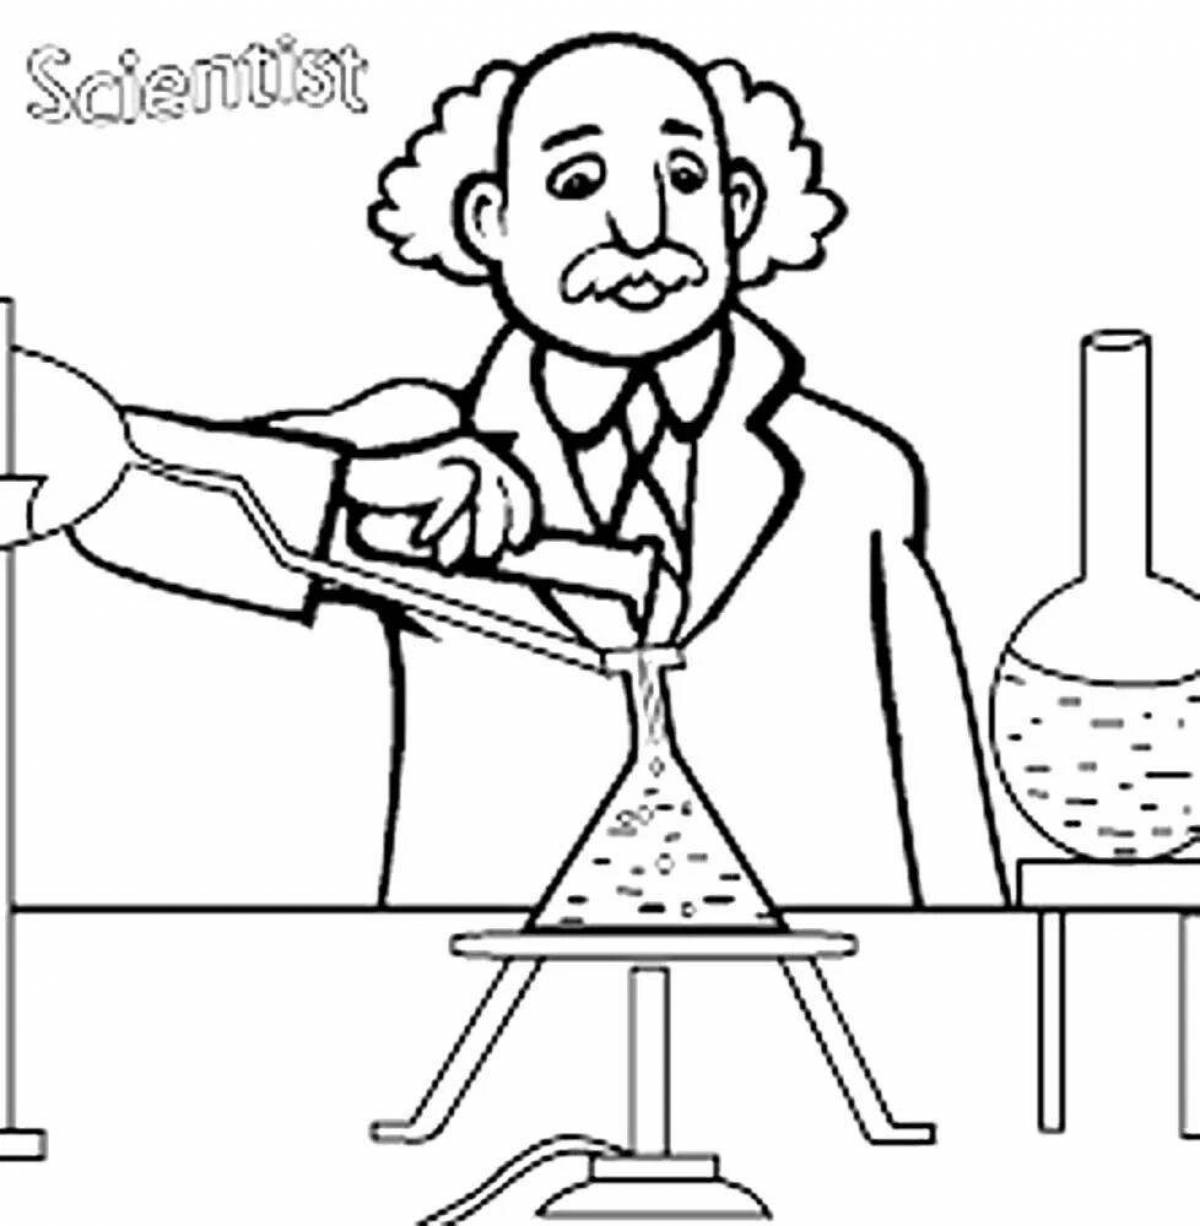 Creative science coloring book for kids